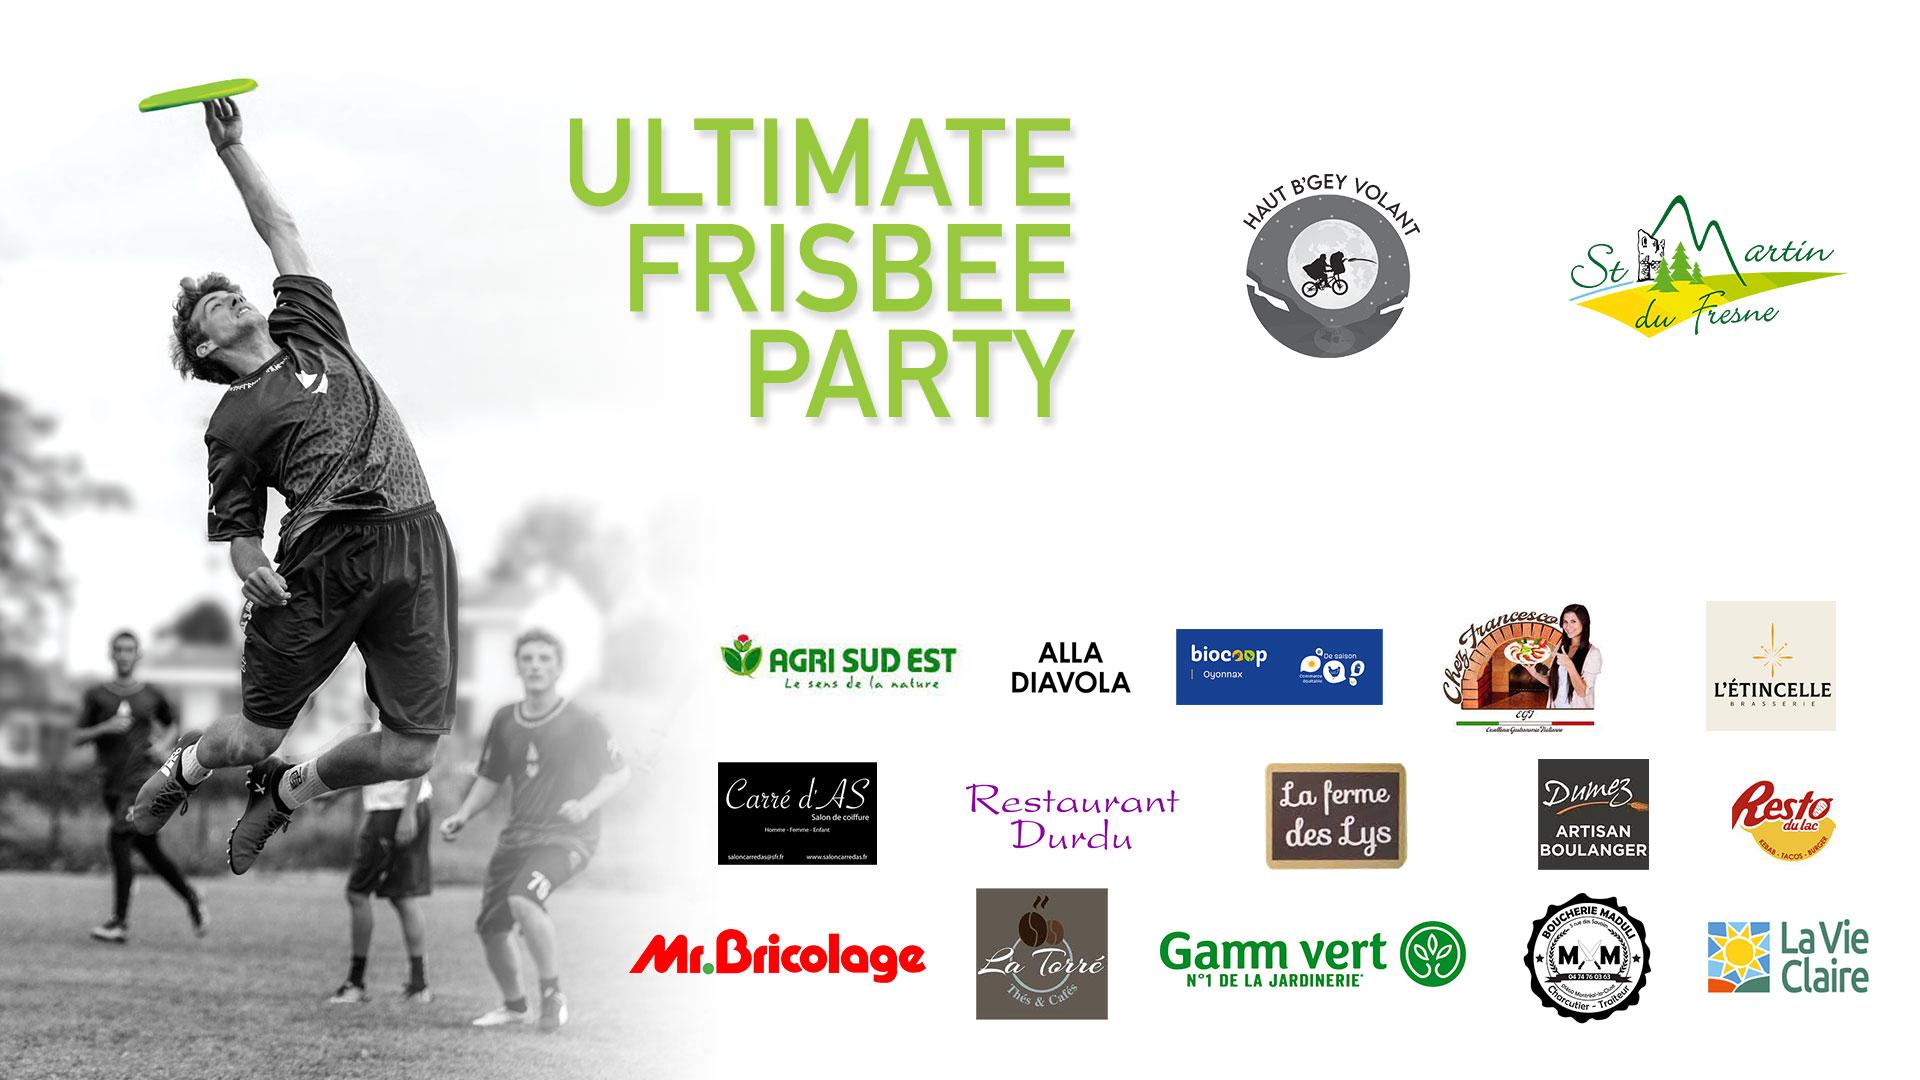 Ultimate frisbee party